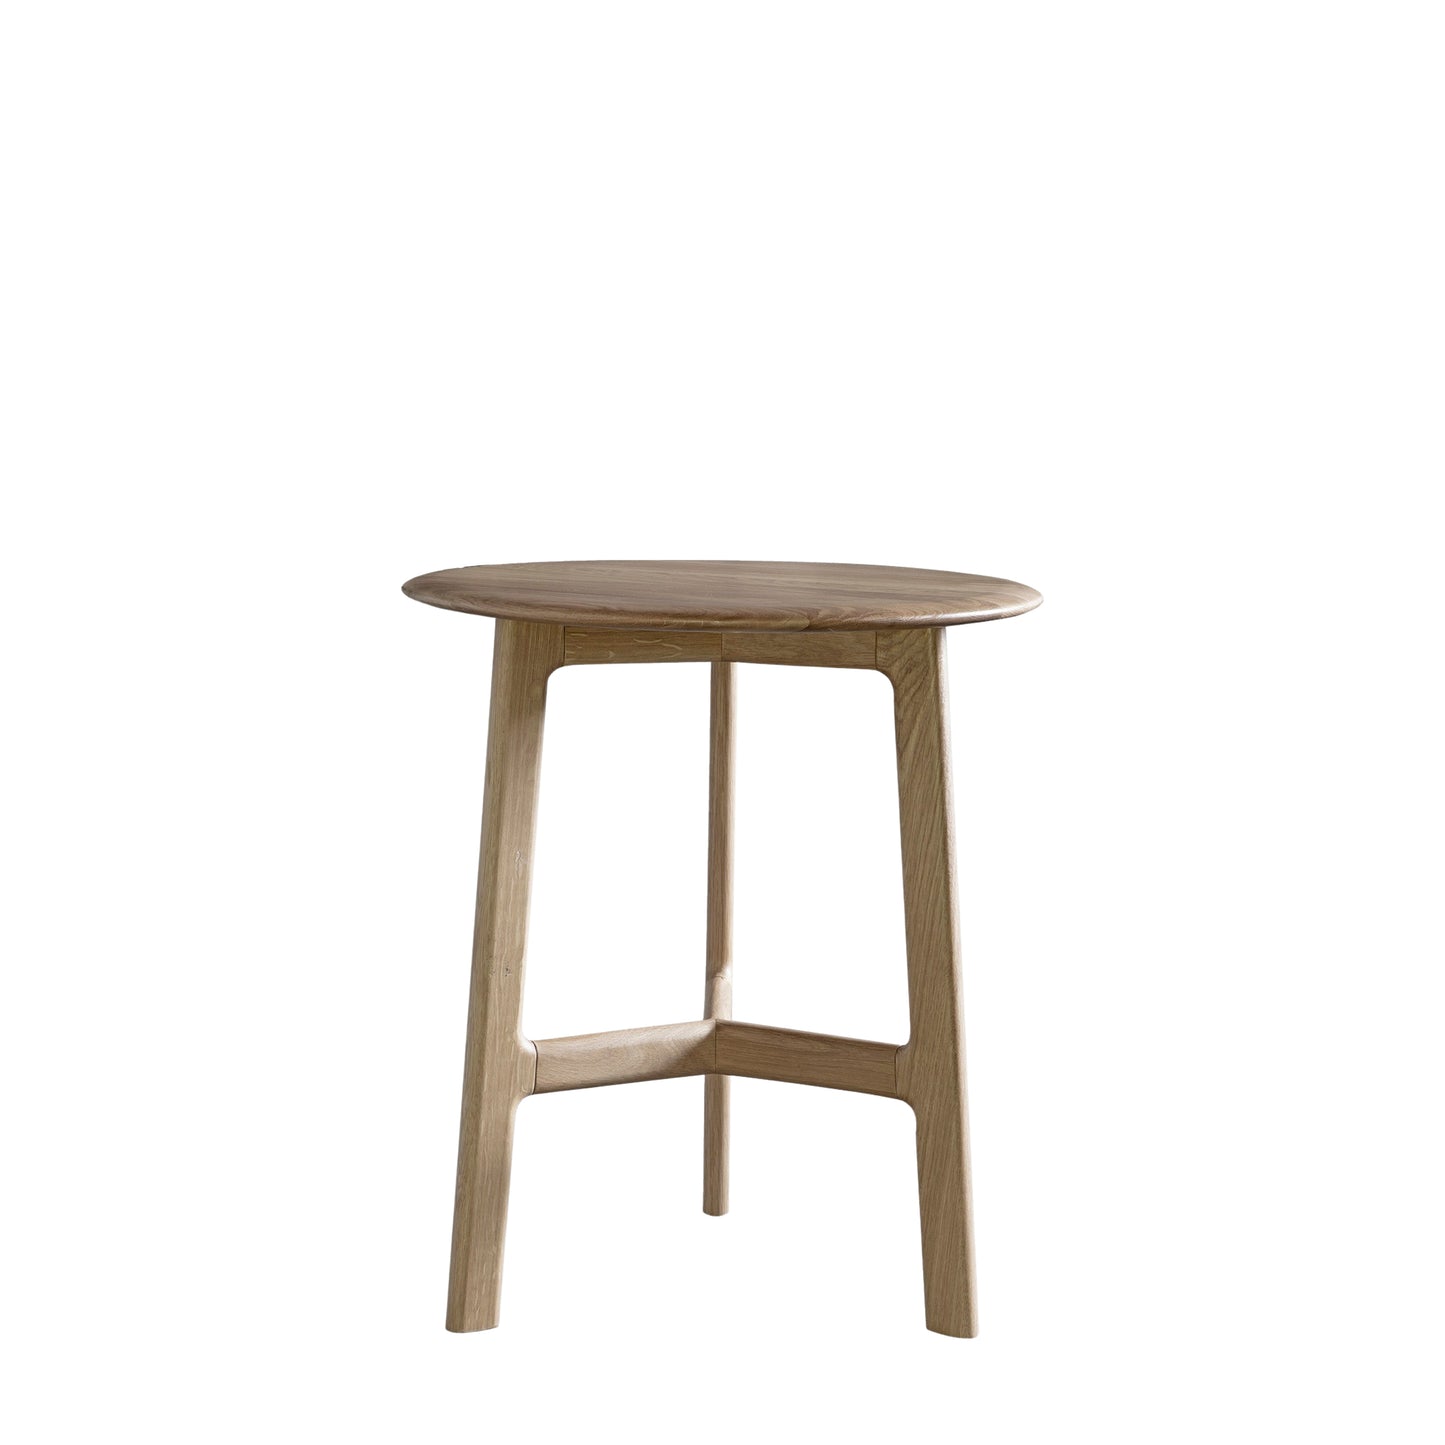 A 500x500x575mm round side table from Kikiathome.co.uk with a wooden top and legs, suitable for interior decor.